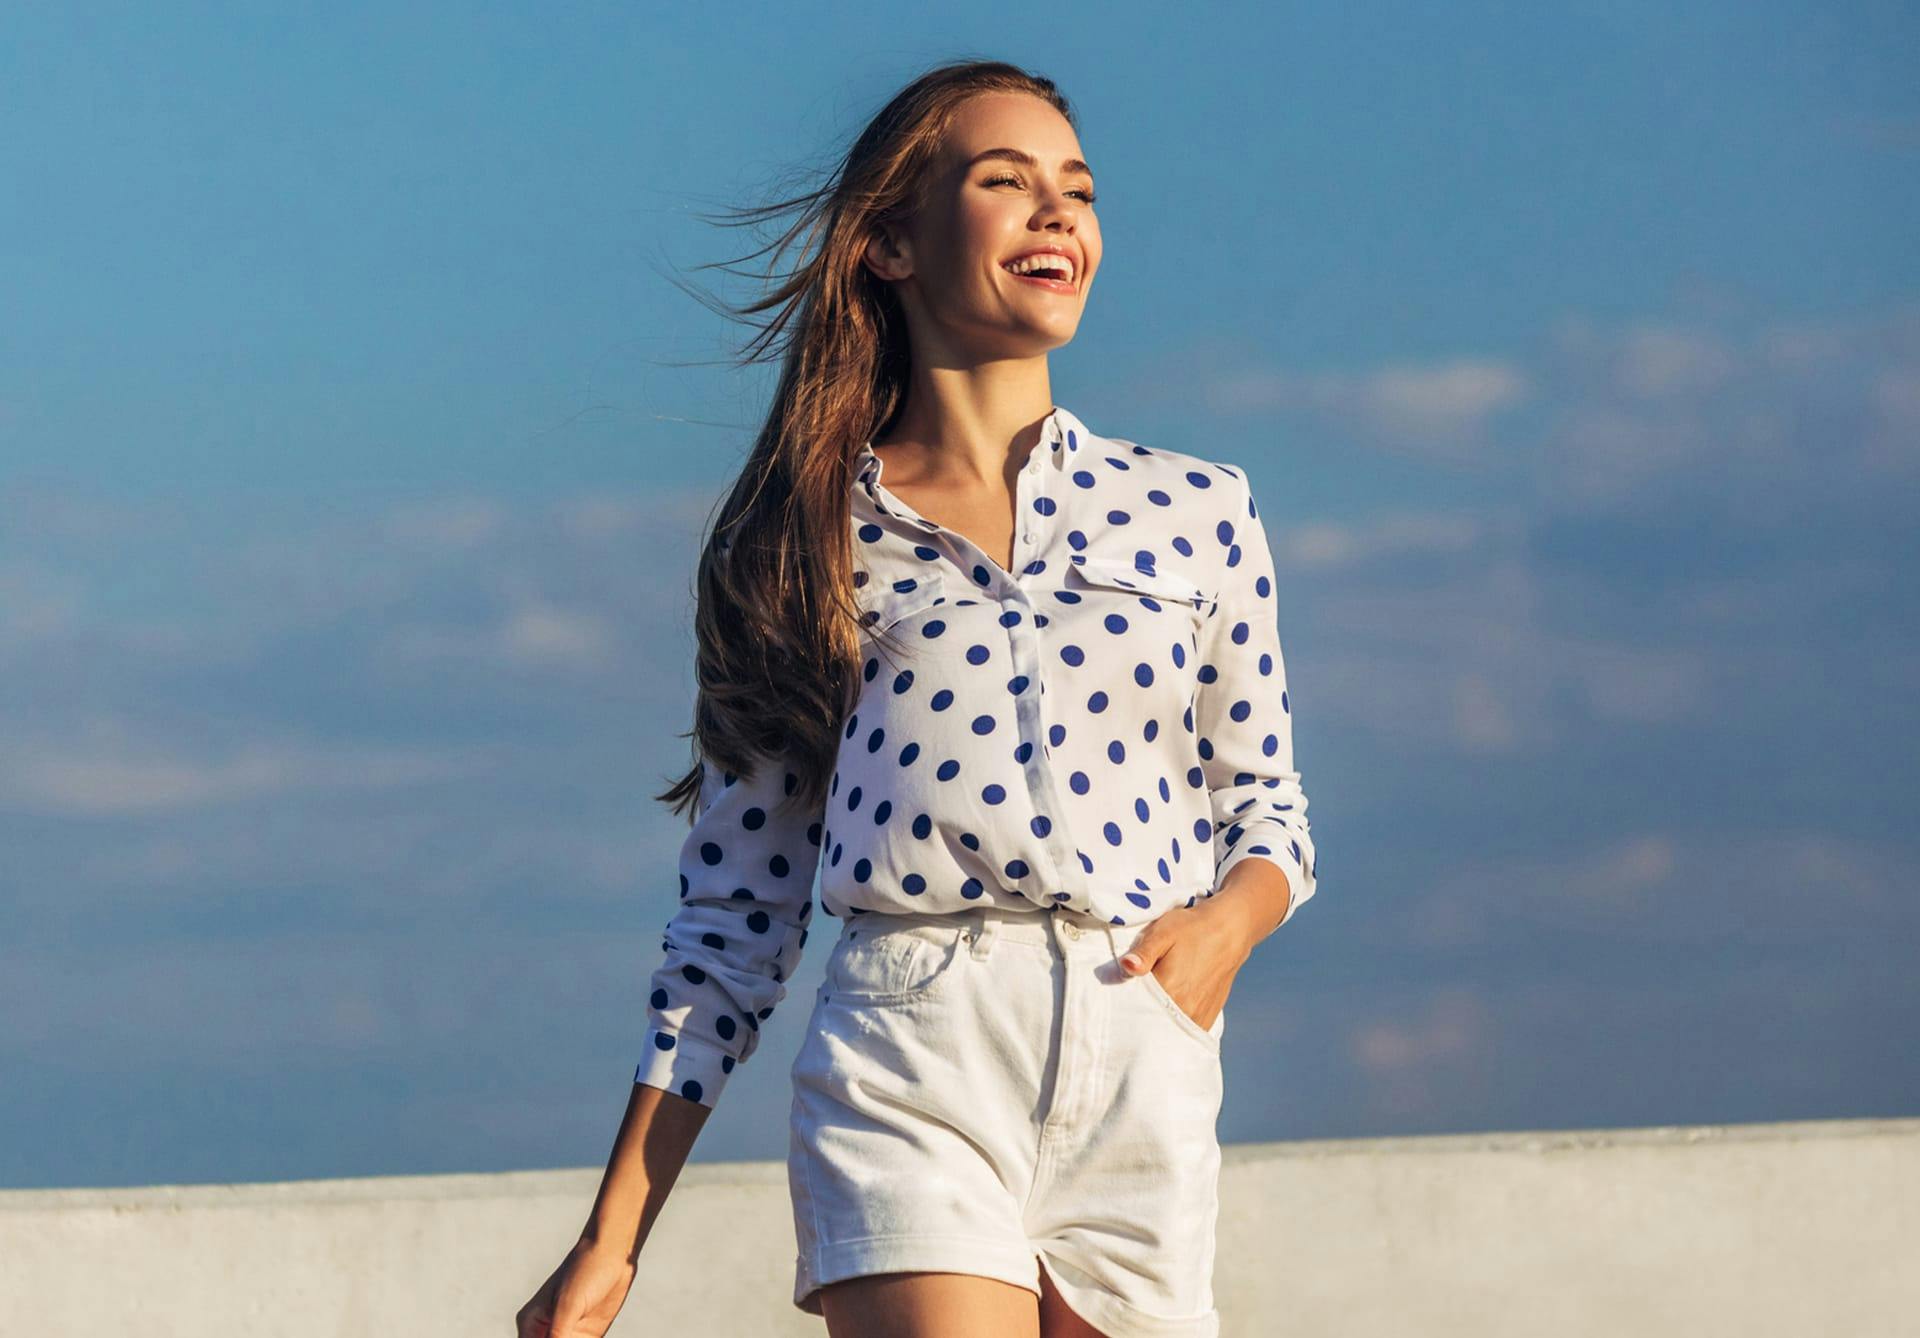 woman in a polka dot top and white shorts